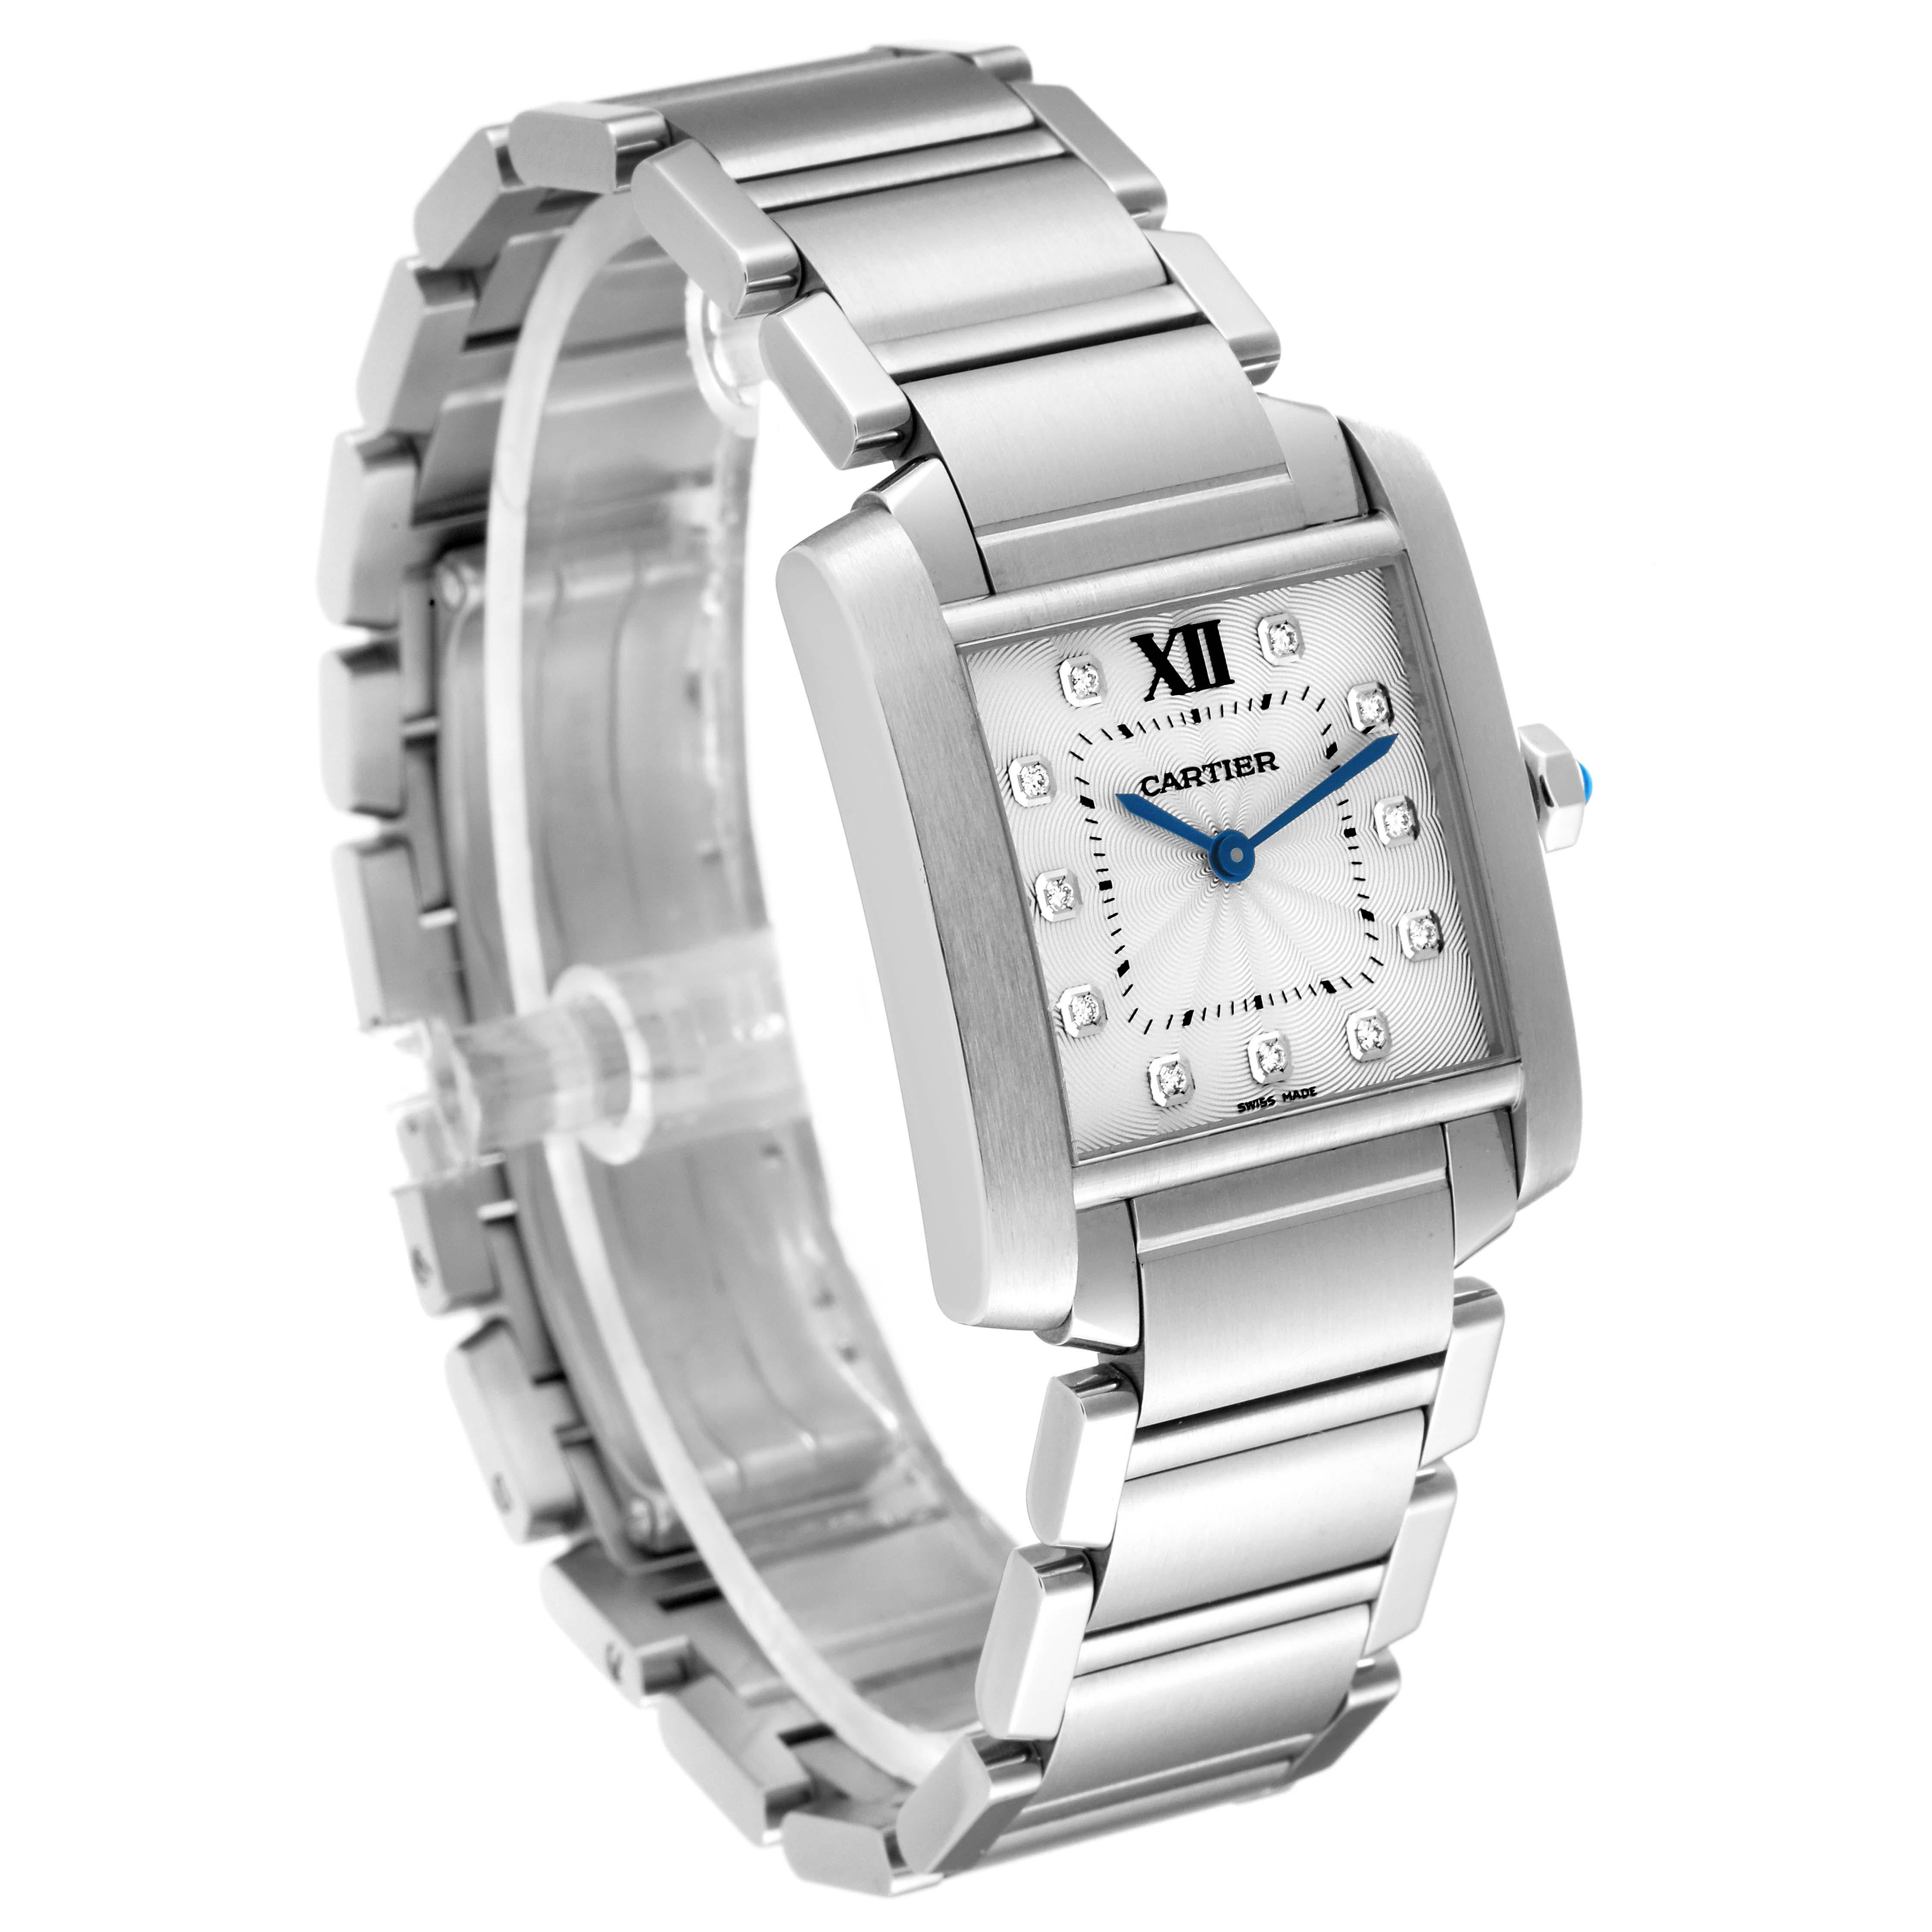 Cartier Tank Francaise Midsize Diamond Steel Ladies Watch WE110007 In Excellent Condition For Sale In Atlanta, GA